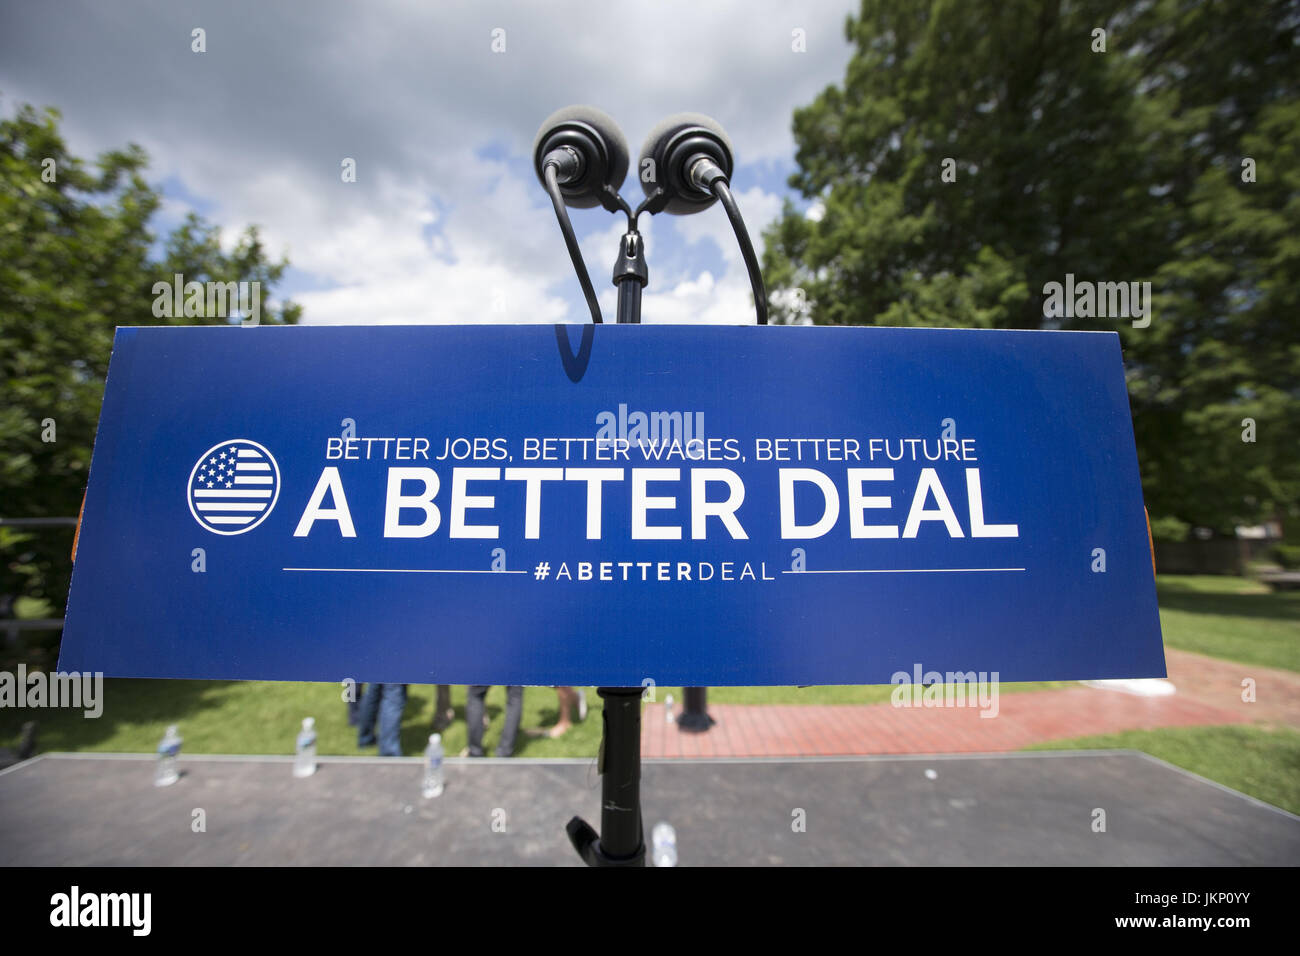 Berryville, Virginia, USA. 24th July, 2017. The podium at a press conference held by Congressional Democratic Leadership as they introduce 'A Better Deal: Better Jobs, Better Wages, Better Future', their new economic agenda at Rose Hill Park in Berryville, Virginia Credit: Alex Edelman/ZUMA Wire/Alamy Live News Stock Photo